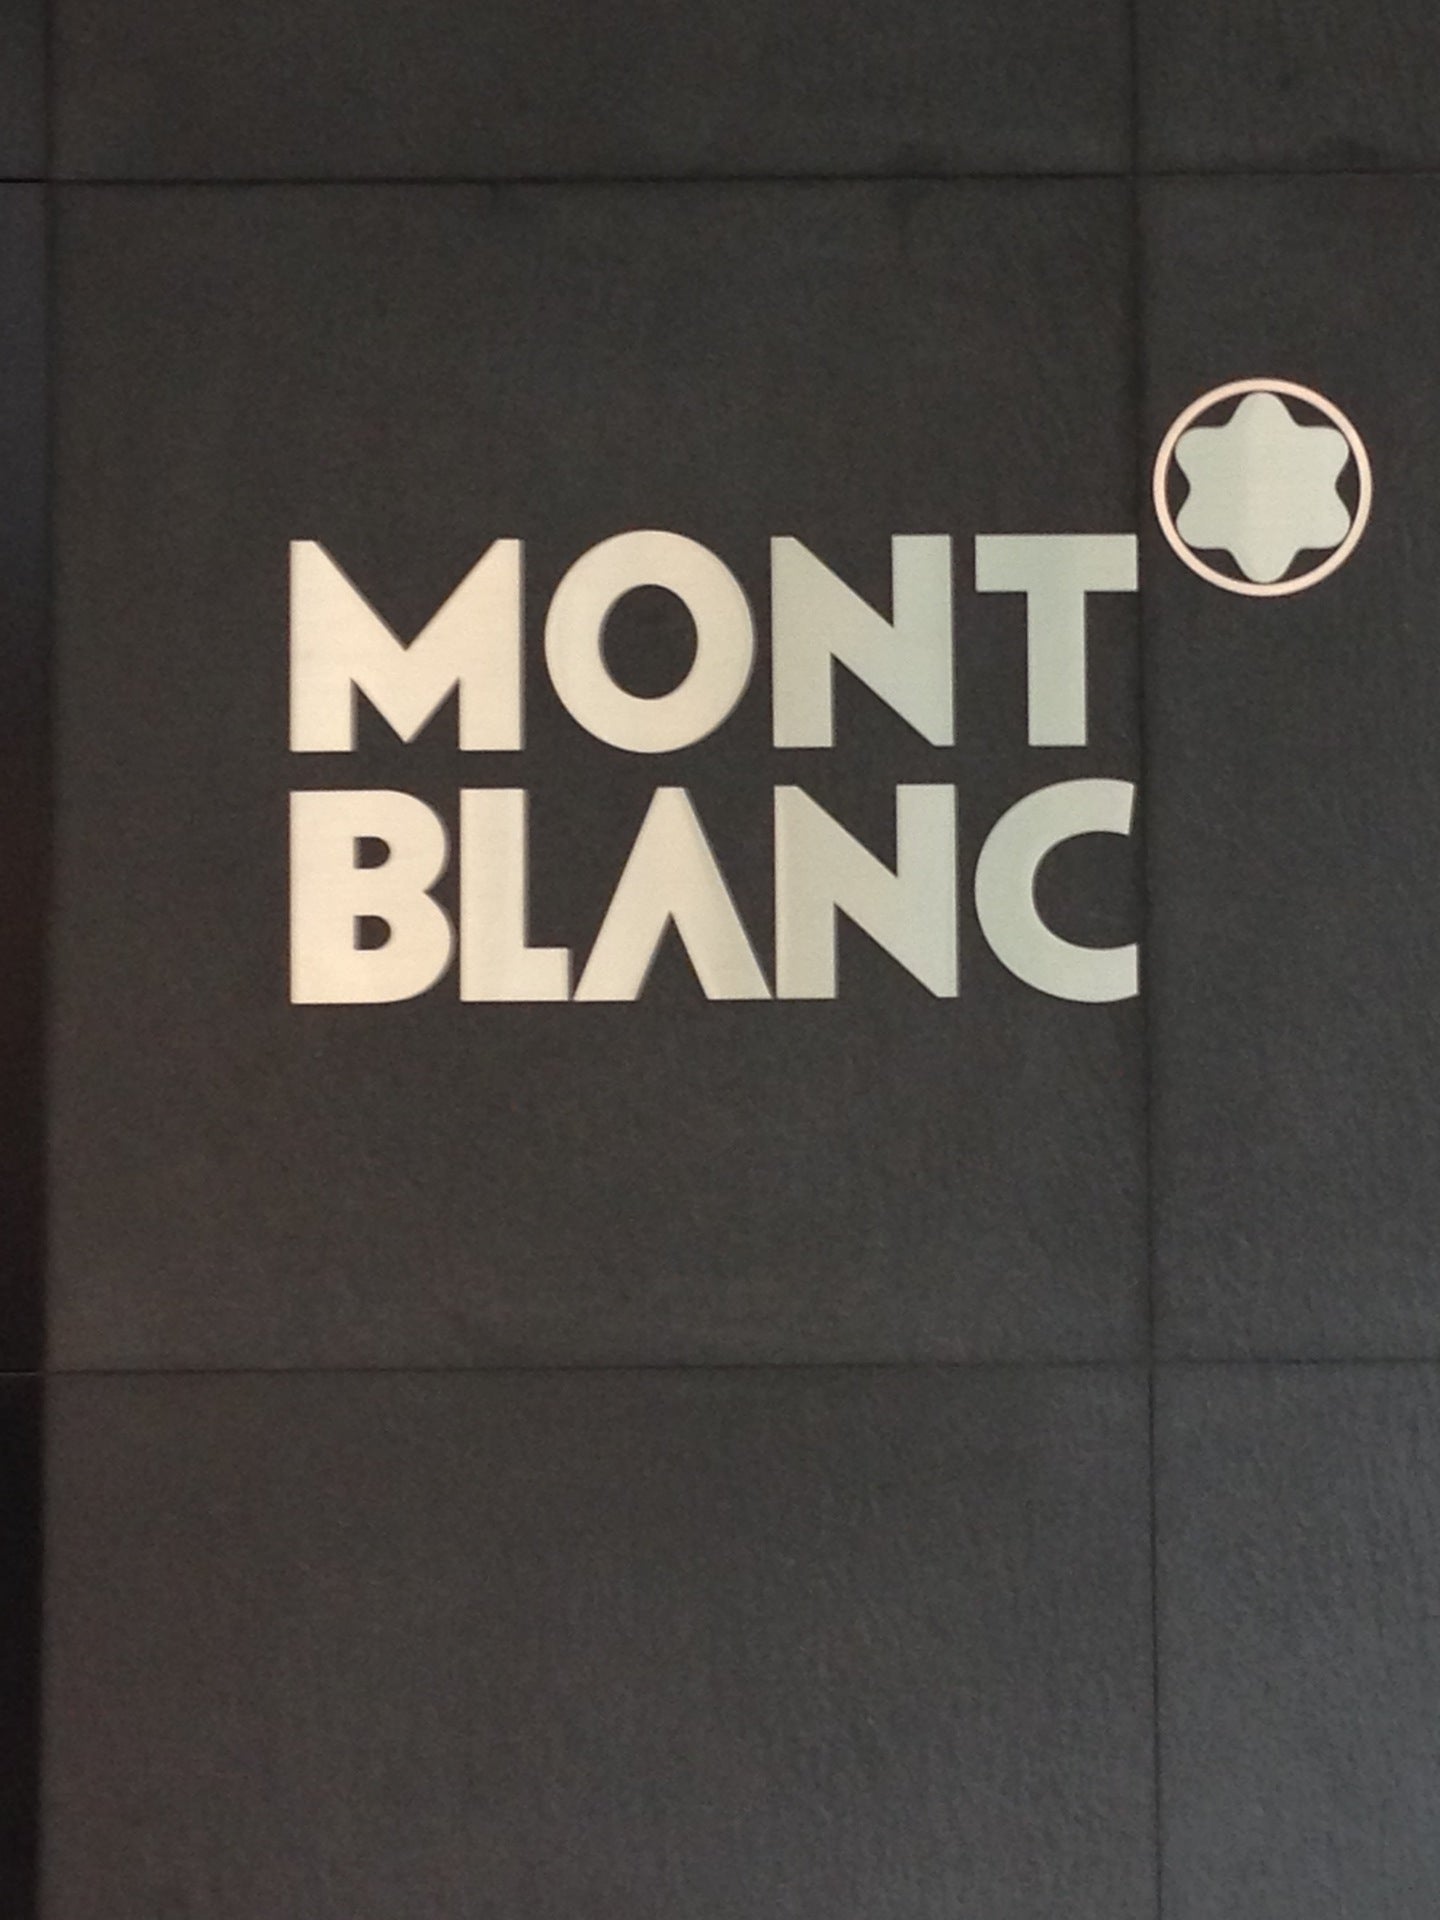 Montblanc at the Mall at Millenia in Orlando Florida